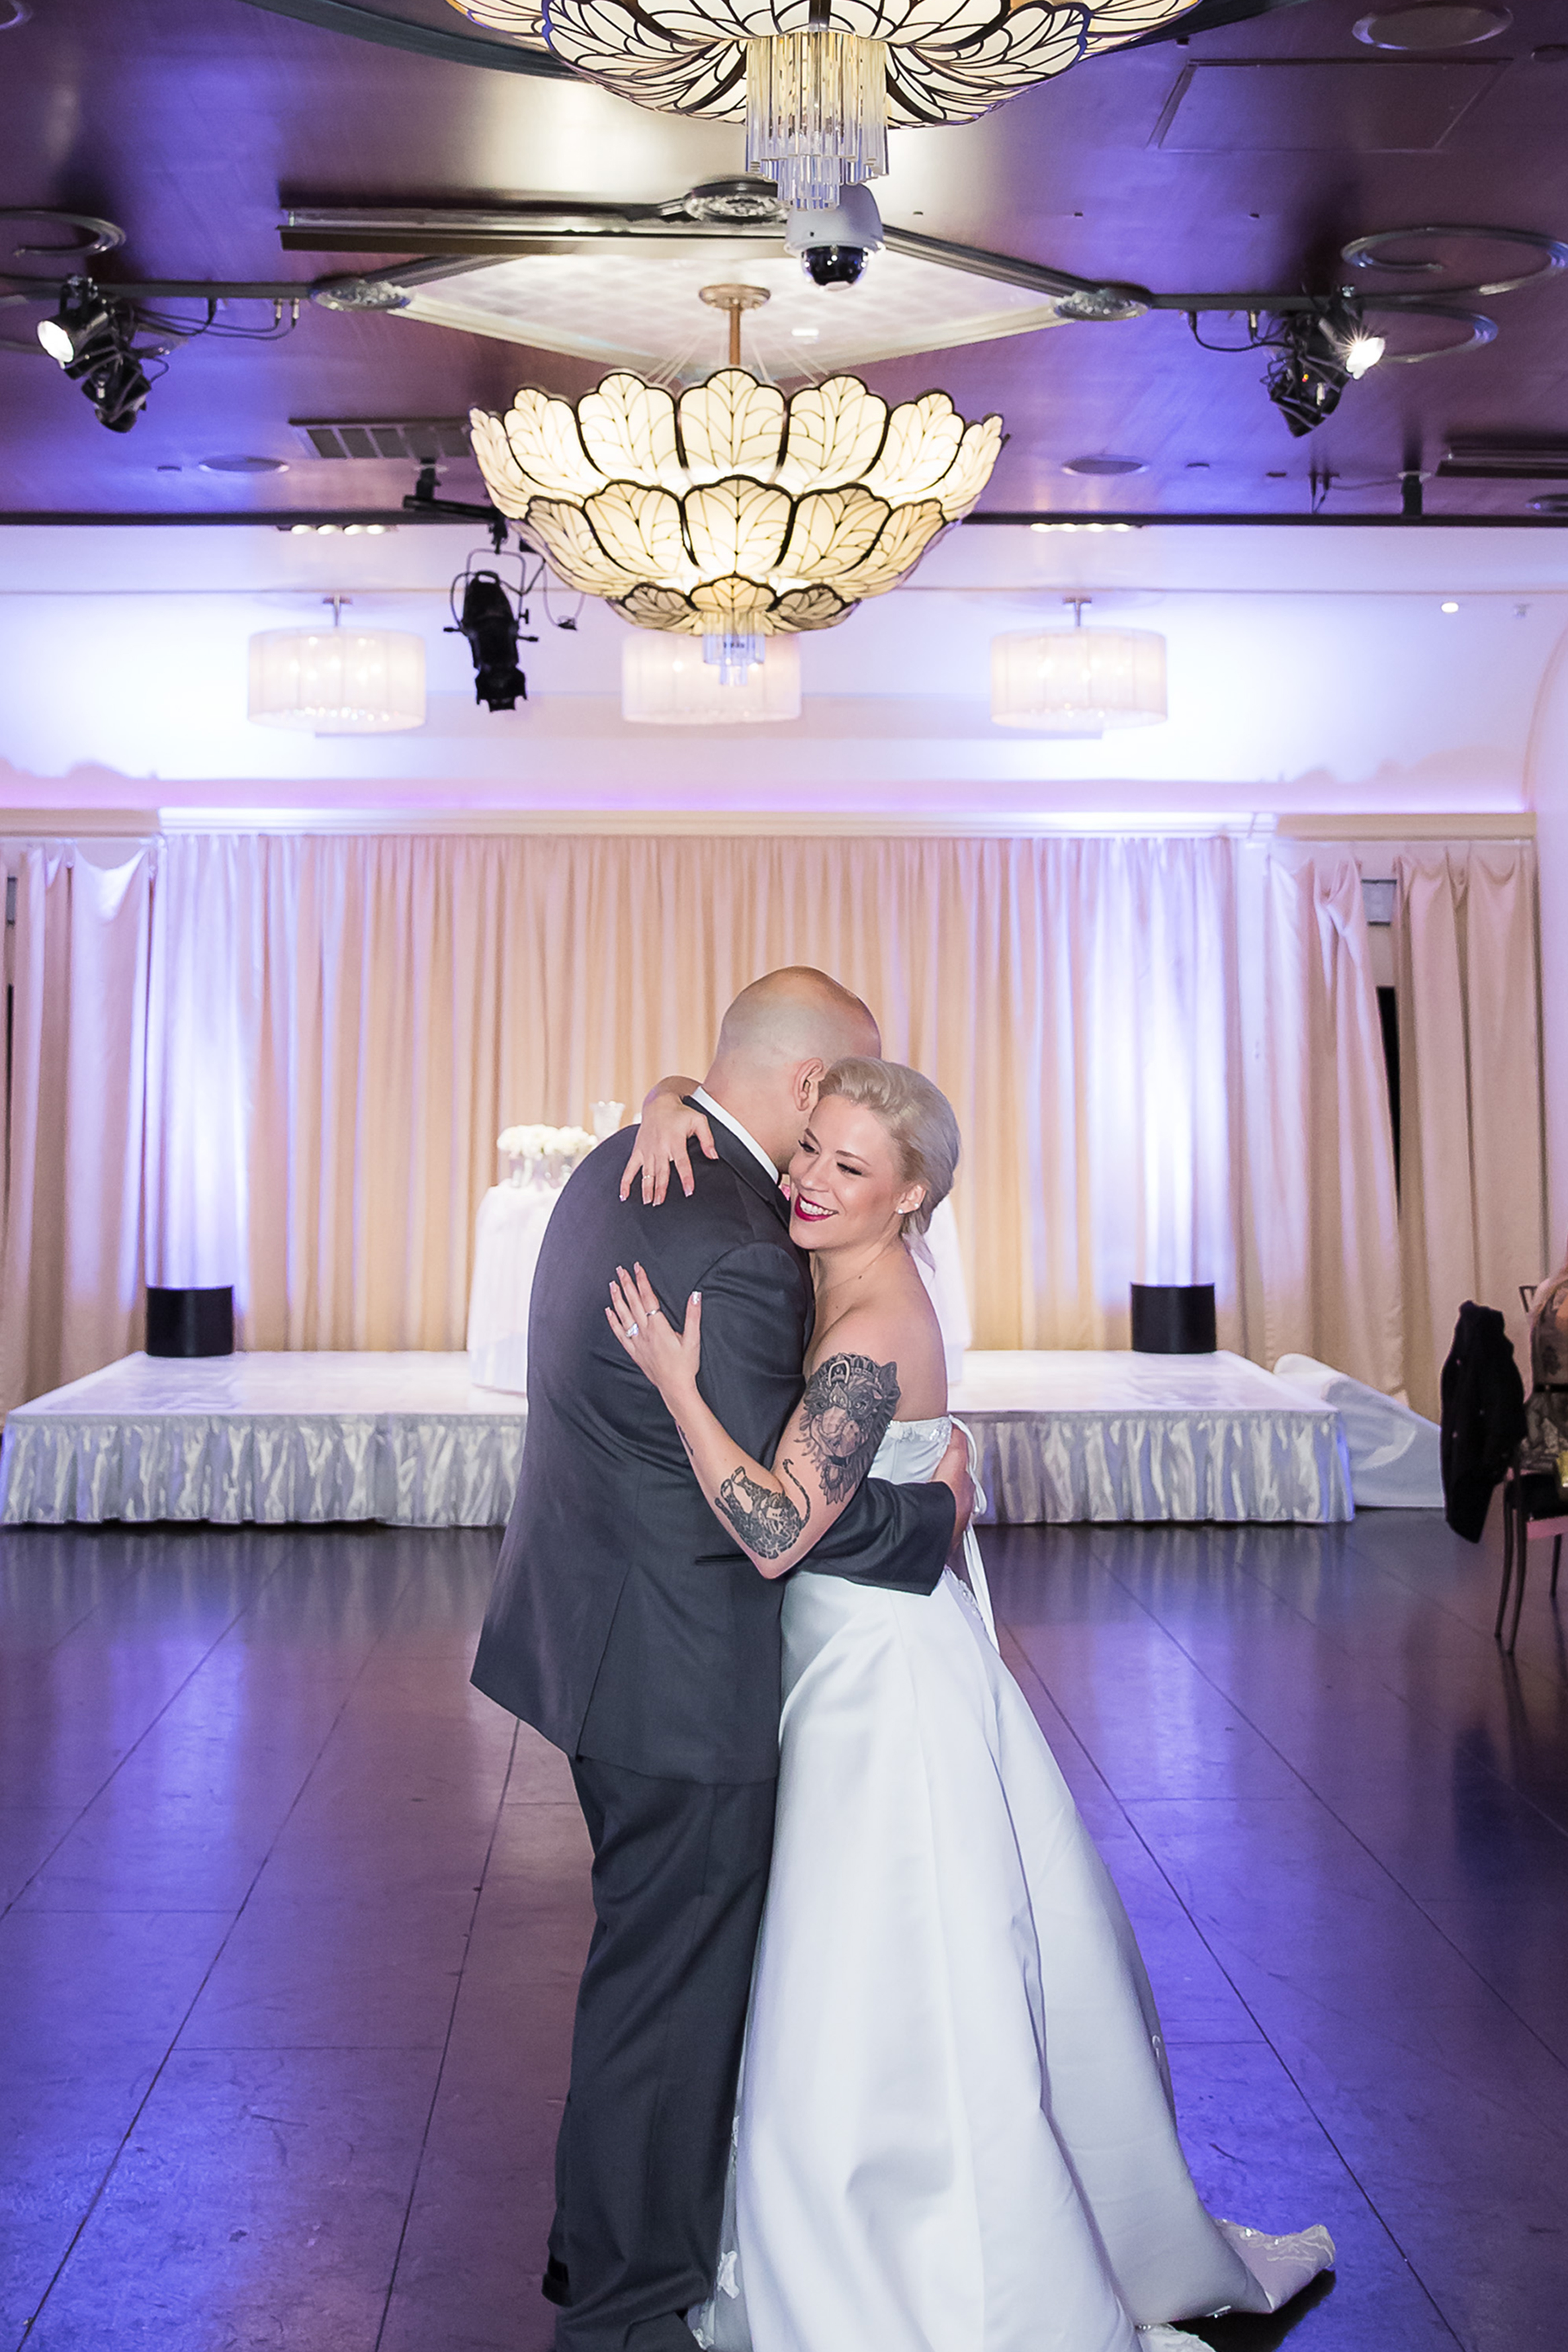 first dance with bride adn groom embracing on the dance floor at their dallas wedding venue